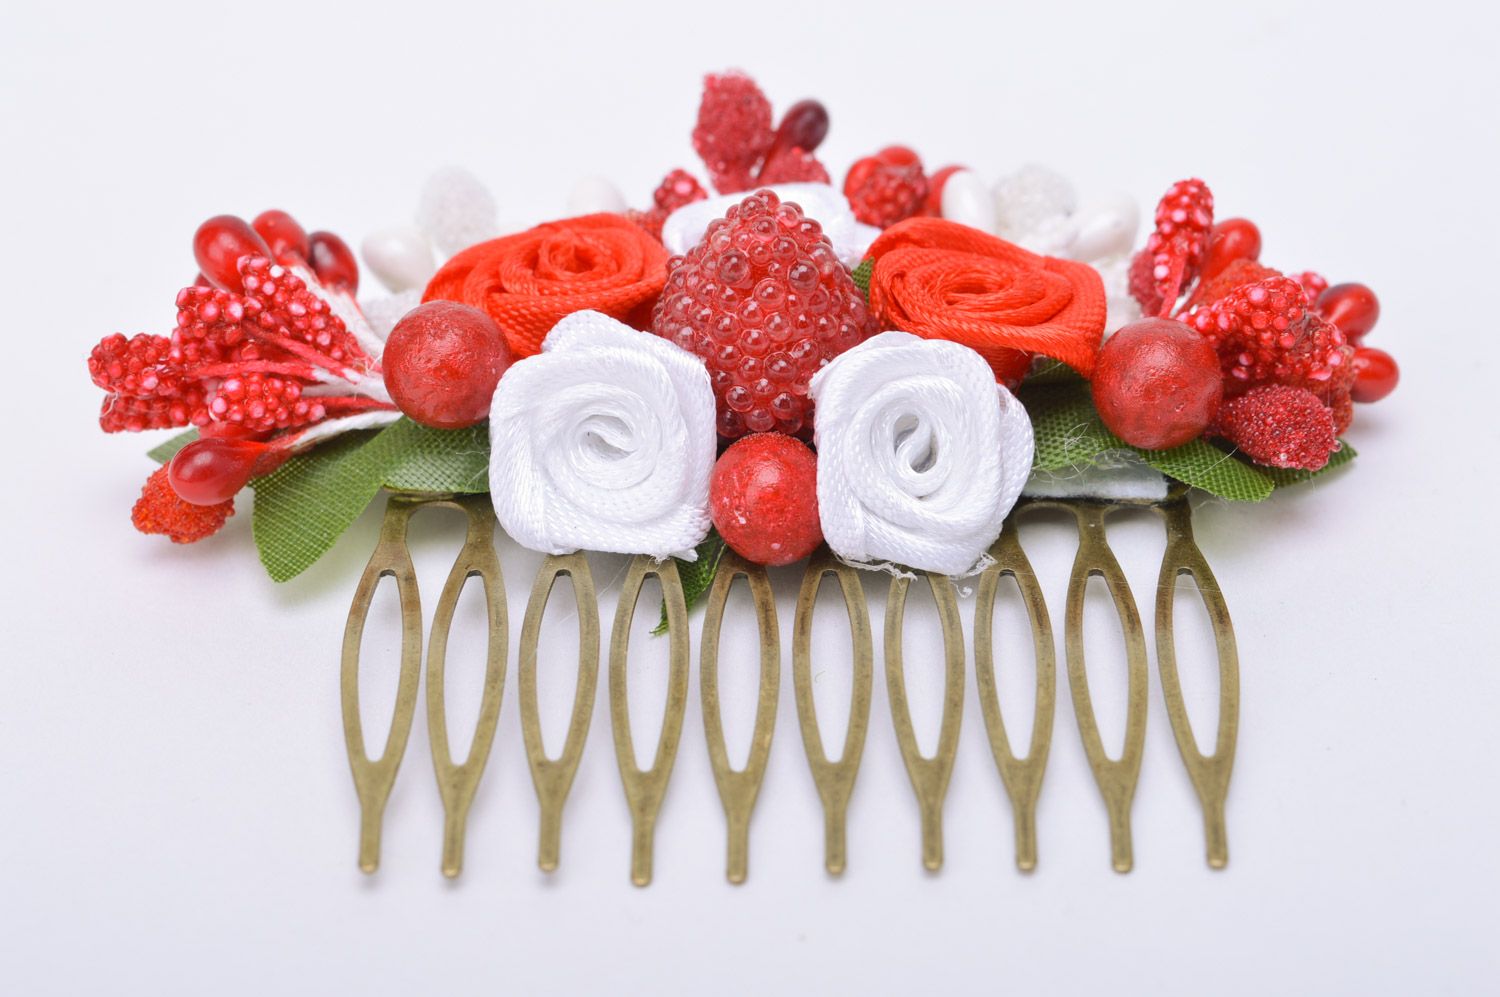 Handmade decorative red and white metal hair comb with ribbons and berries photo 2